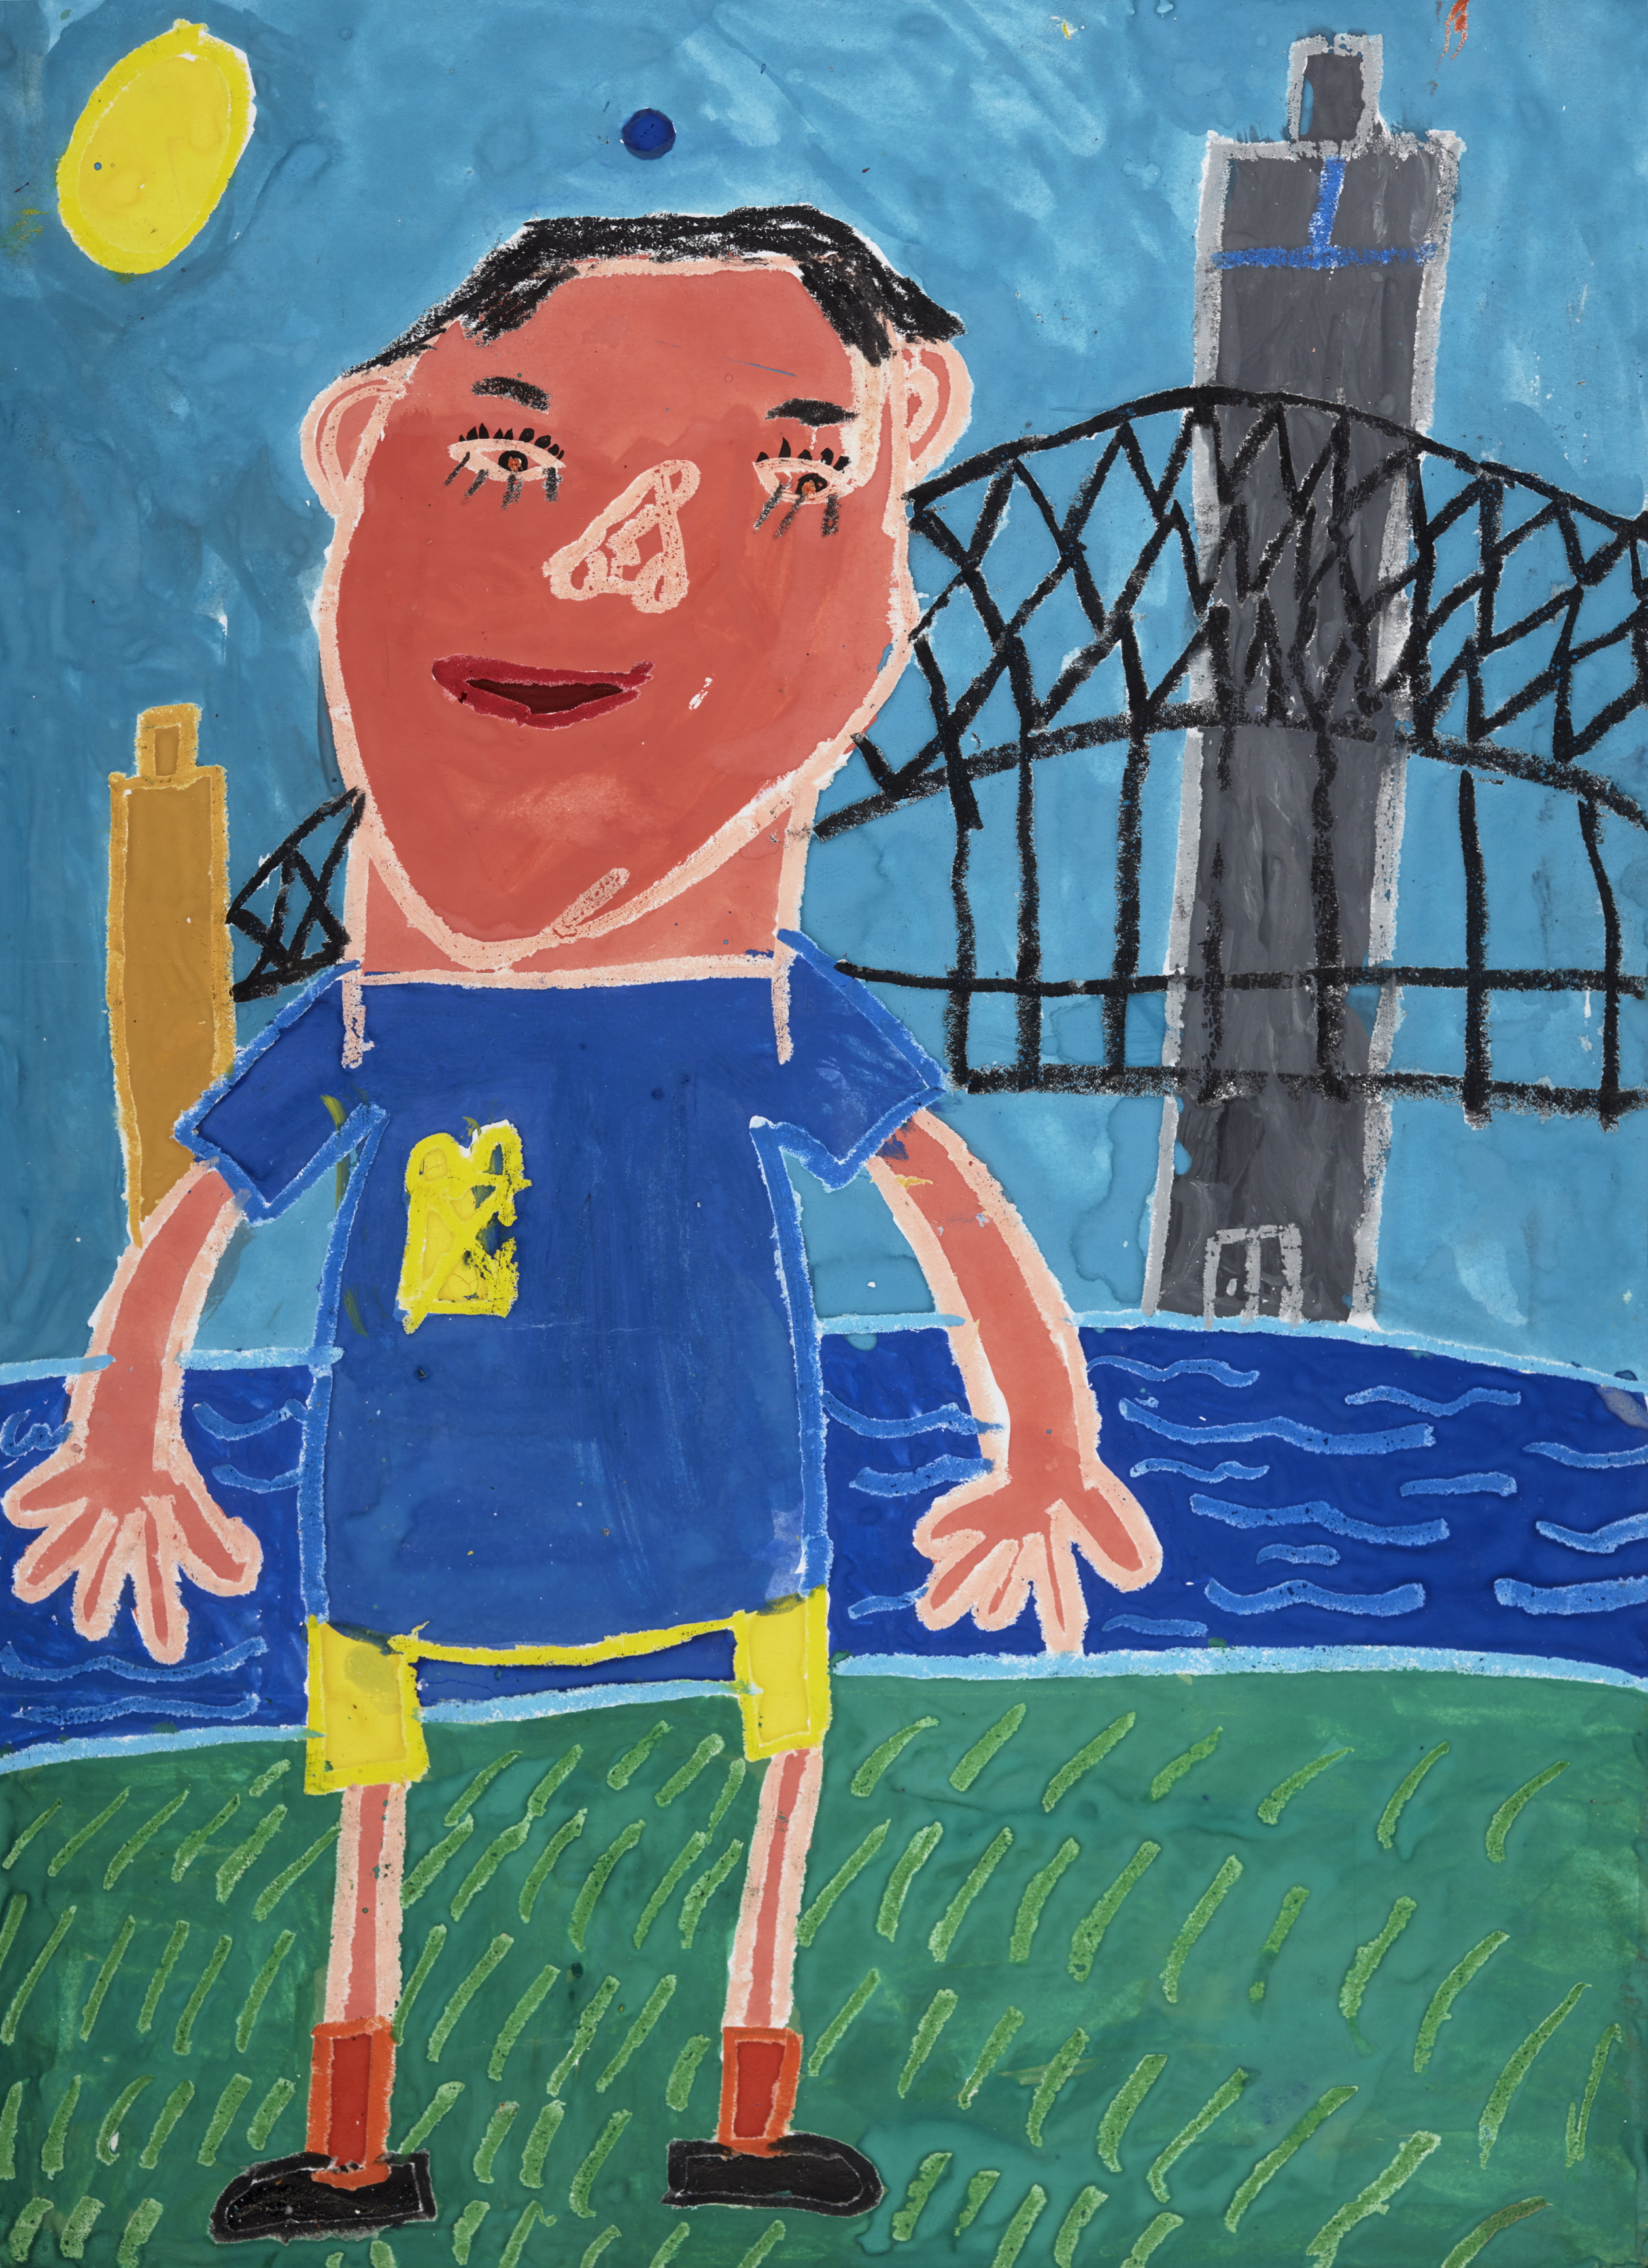 2016 Young Archie competition, 5ï¿½8 years finalist Alexander Bennett Age 8 Wahroonga, NSW   EMBARGOED TILL 7 JULY ***This image may only be used in conjunction with editorial coverage of the exhibition, Young Archie competition,  16 July - 9 Oct, at the Art Gallery of New South Wales. This image may not be cropped or overwritten. Prior approval in writing required for use as a cover. Caption details must accompany reproduction of the image. *** Media contact: Hannah.McKissock-Davis@ag.nsw.gov.au  *** Local Caption *** EMBARGOED TILL 7 JULY ***This image may only be used in conjunction with editorial coverage of the exhibition, Young Archie competition,  16 July - 9 Oct, at the Art Gallery of New South Wales. This image may not be cropped or overwritten. Prior approval in writing required for use as a cover. Caption details must accompany reproduction of the image. *** Media contact: Hannah.McKissock-Davis@ag.nsw.gov.au